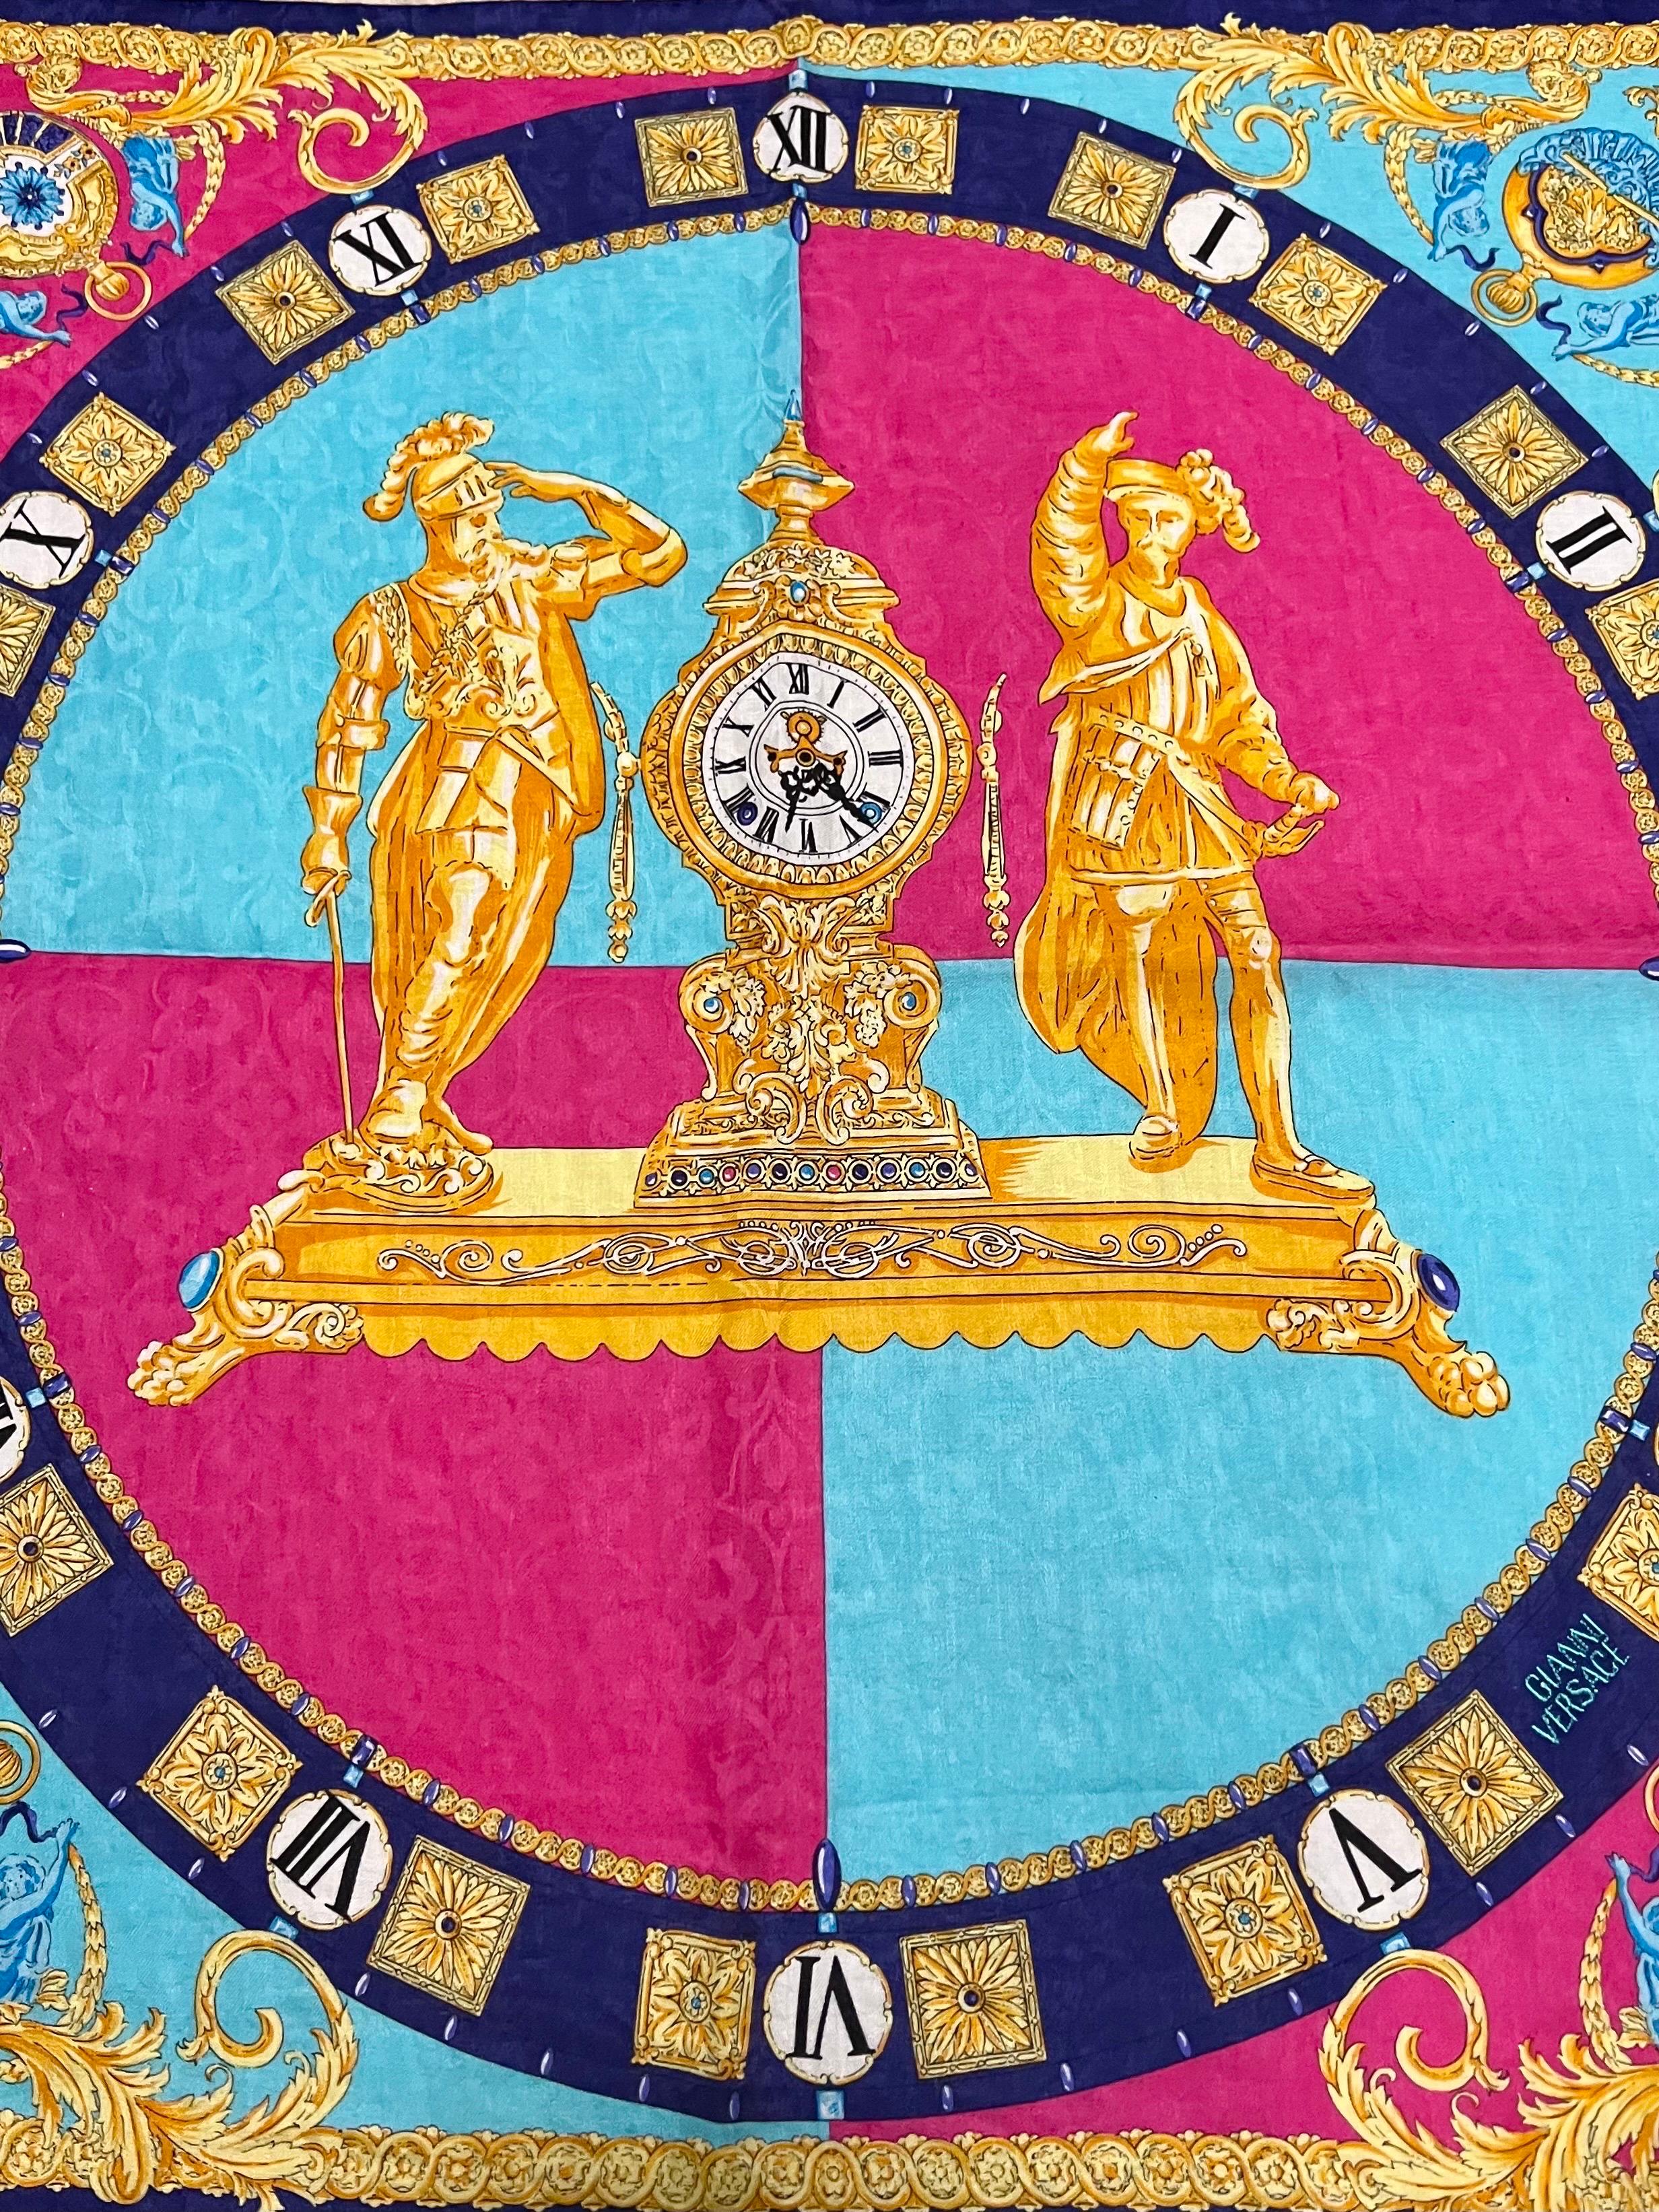 Gianni Versace Roman Clock early 1990's Scarf. Featuring Baroque multi-colored Roman Clock Numerals around cherubs and gold time keepers in the middle. 

Size: 20.5